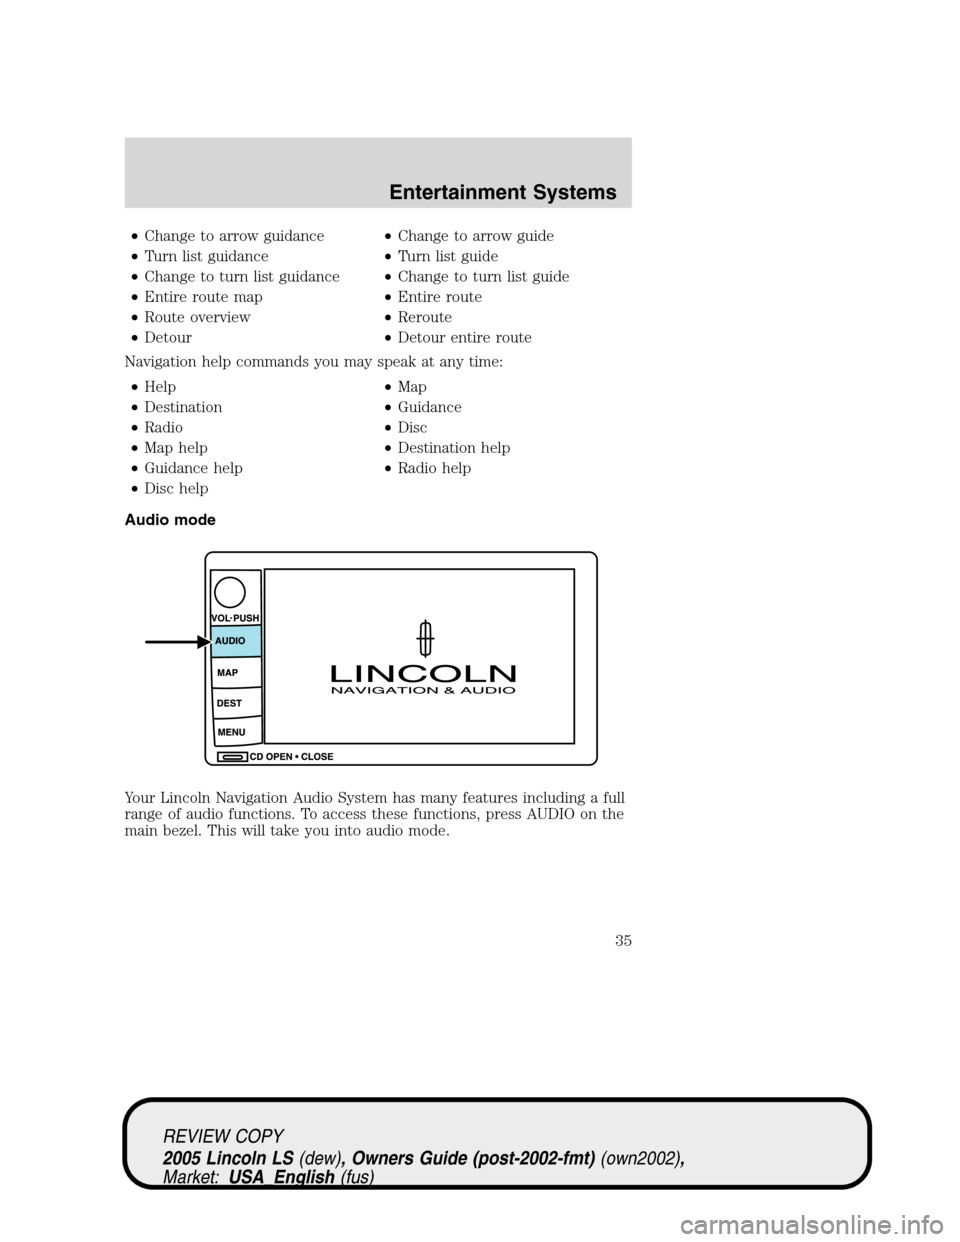 LINCOLN LS 2005  Owners Manual •Change to arrow guidance•Change to arrow guide
•Turn list guidance•Turn list guide
•Change to turn list guidance•Change to turn list guide
•Entire route map•Entire route
•Route over